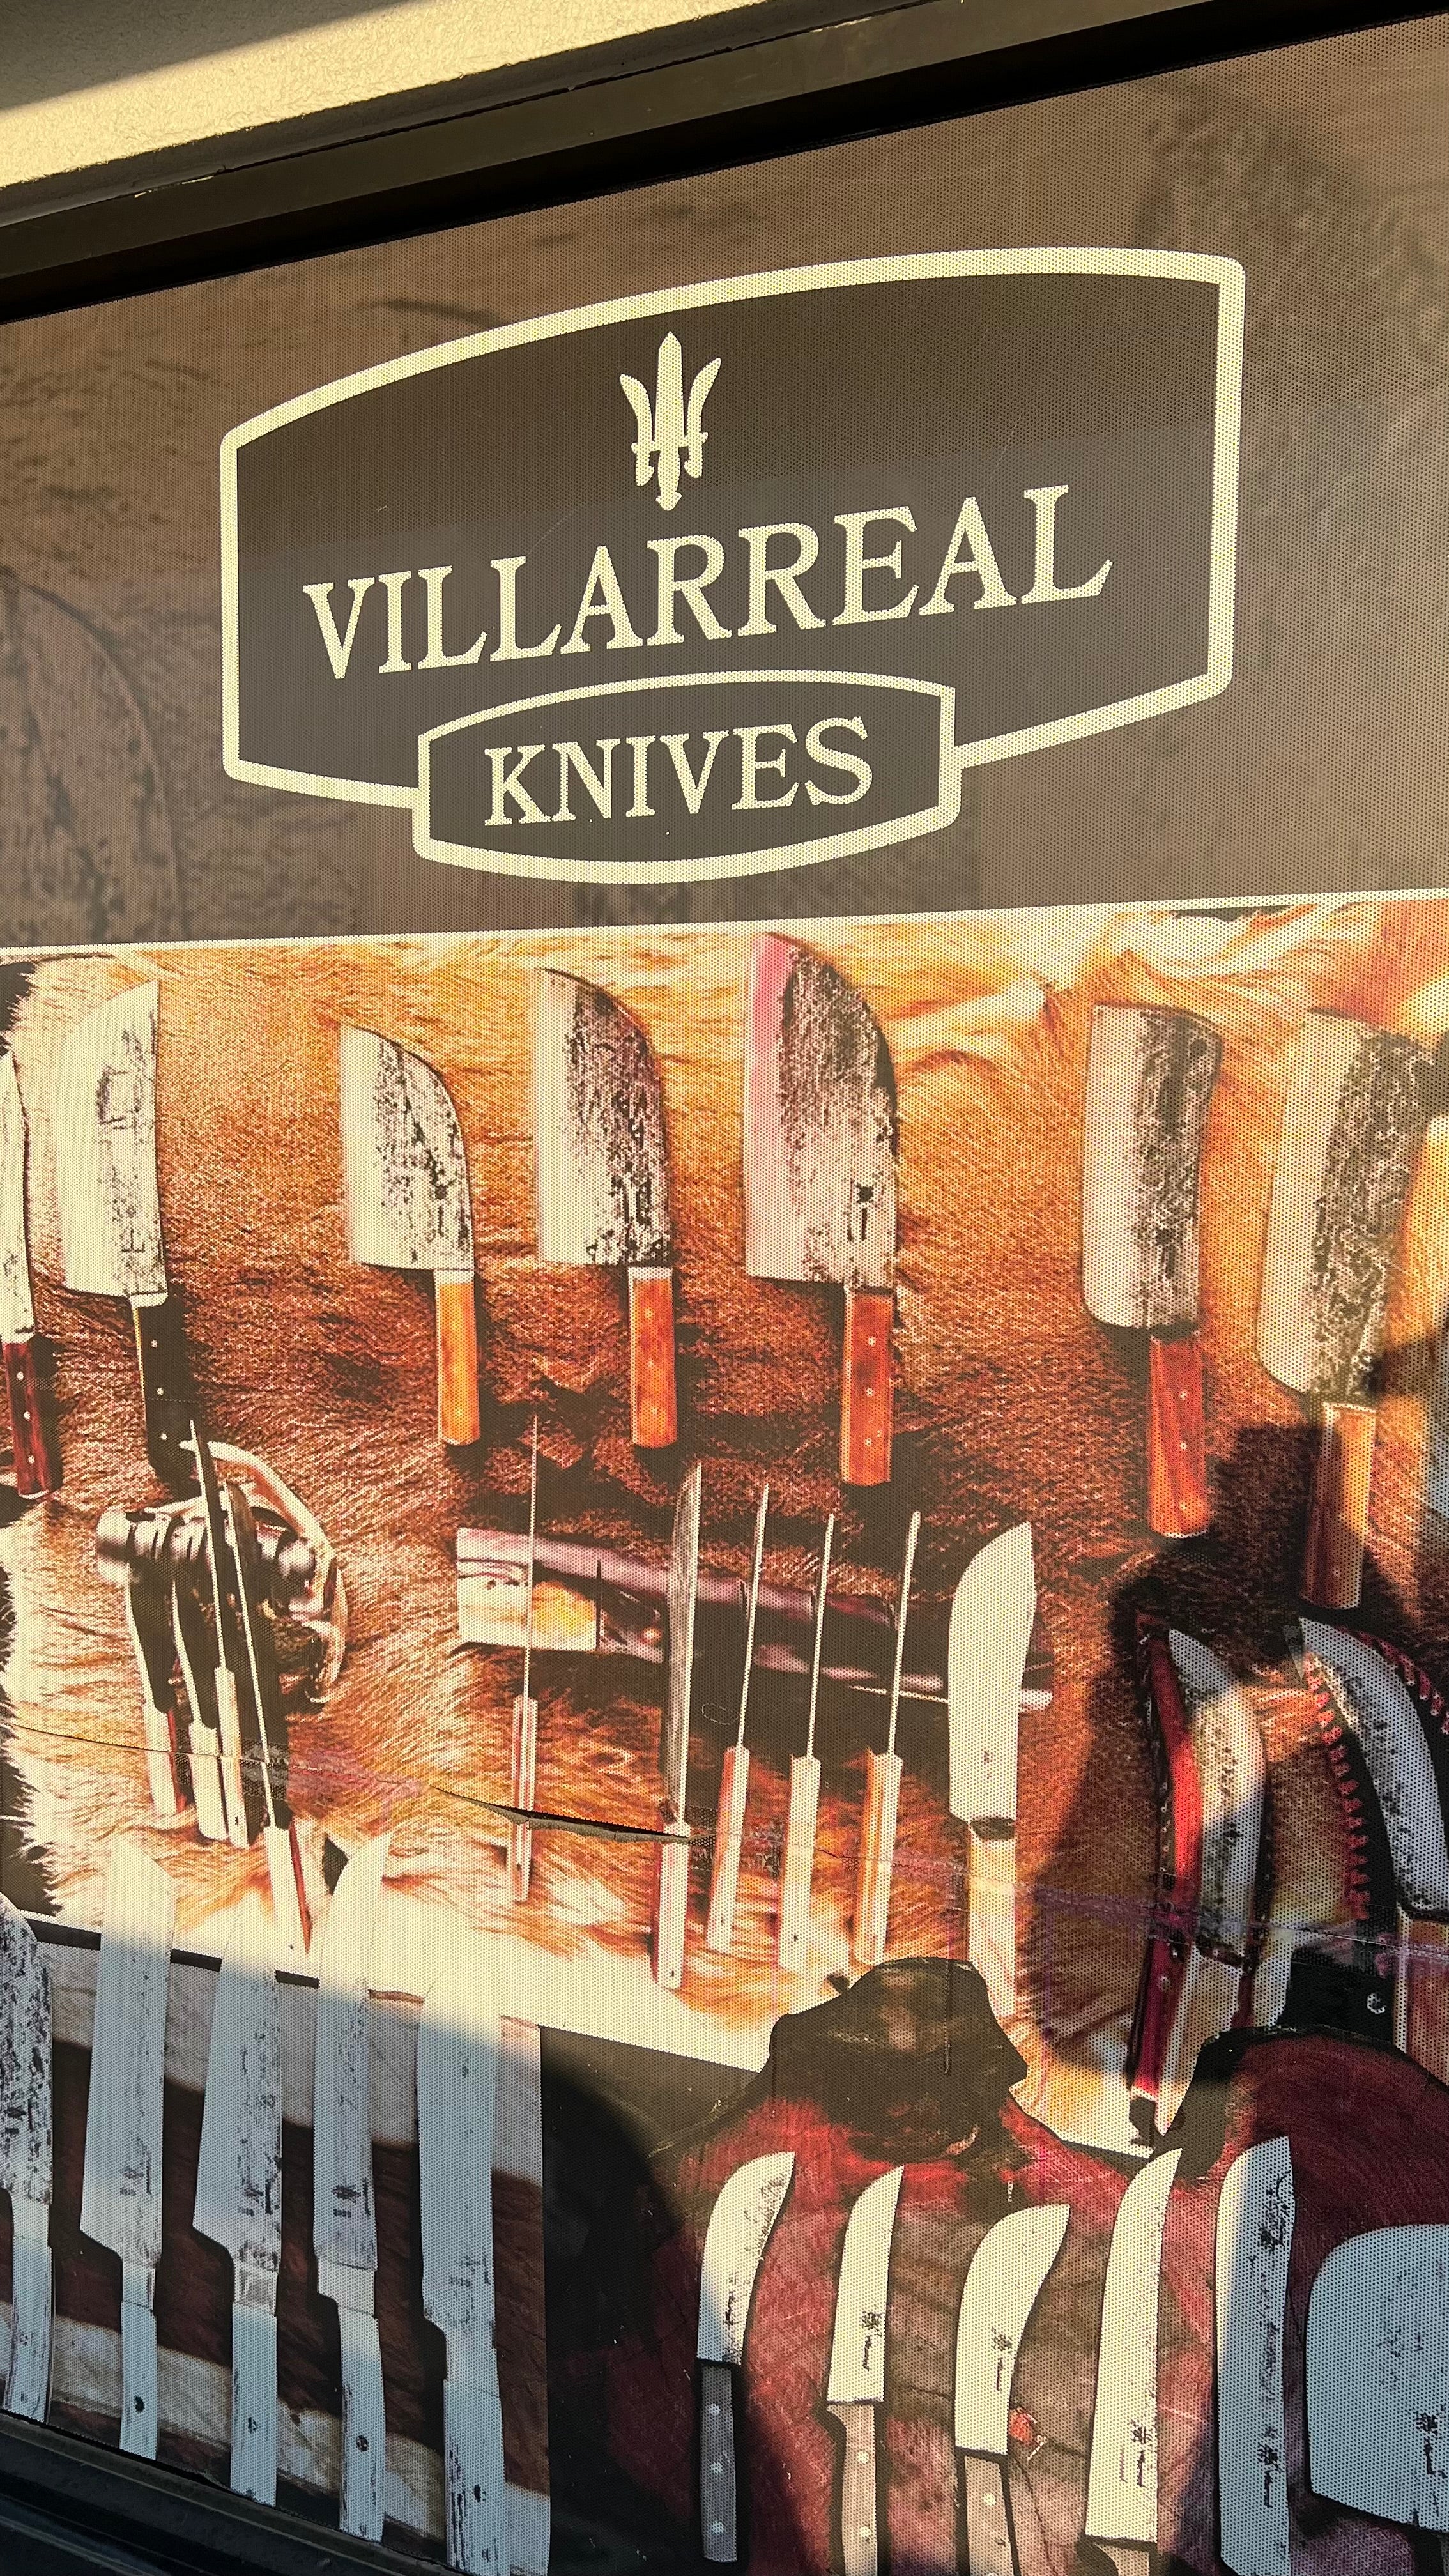 Load video: Video shows the cleaning process of our handcrafted knives.